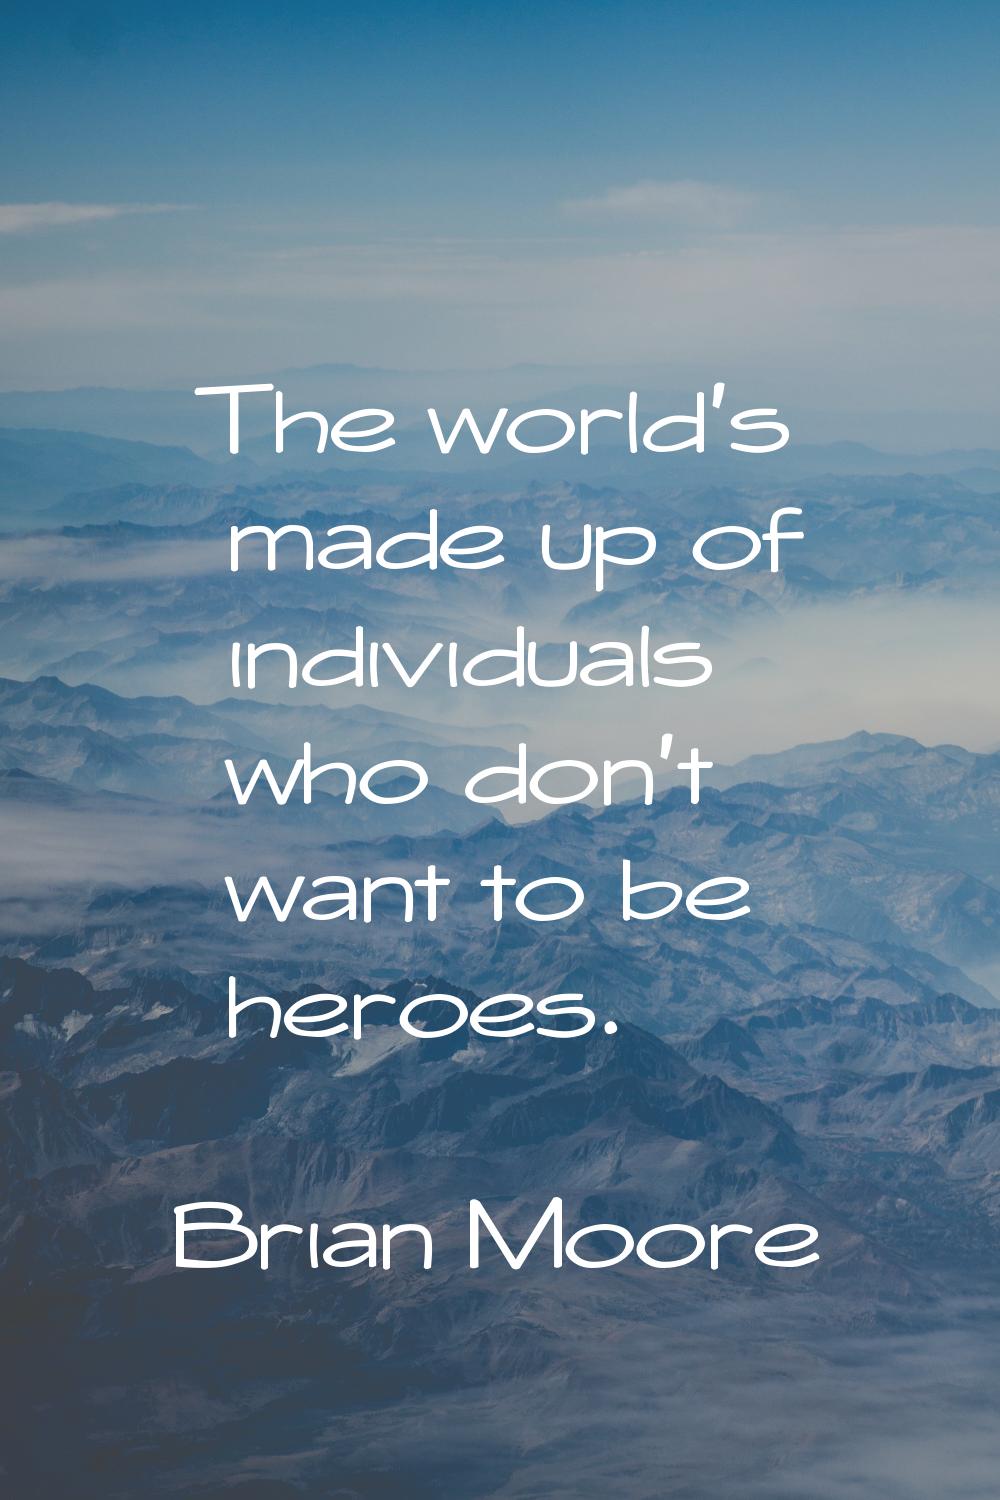 The world's made up of individuals who don't want to be heroes.